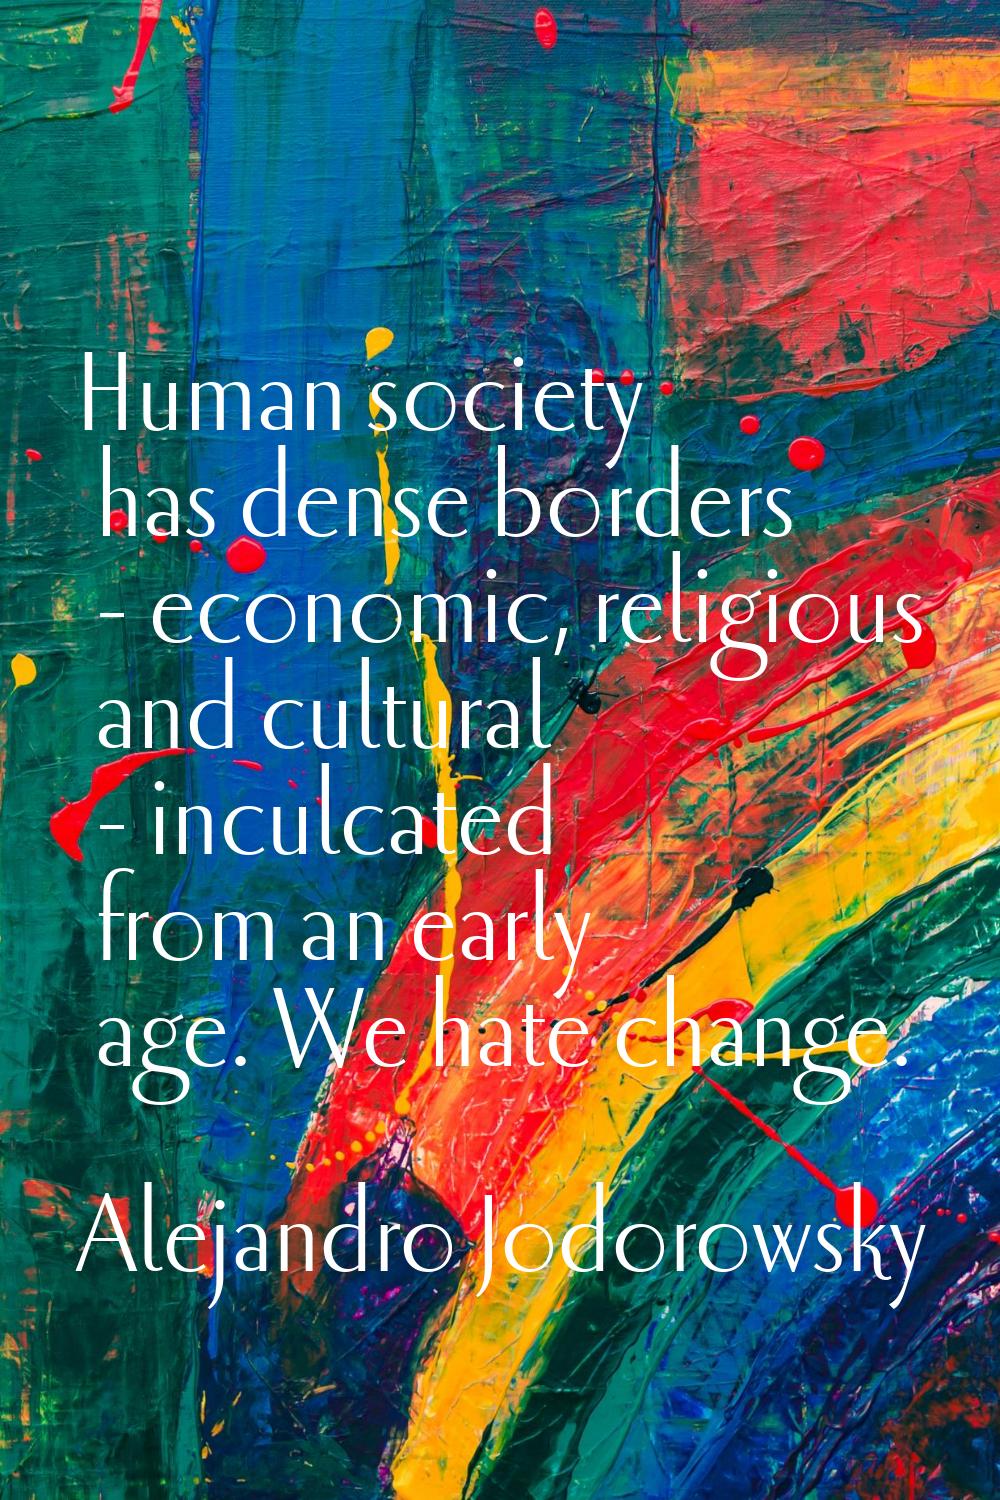 Human society has dense borders - economic, religious and cultural - inculcated from an early age. 